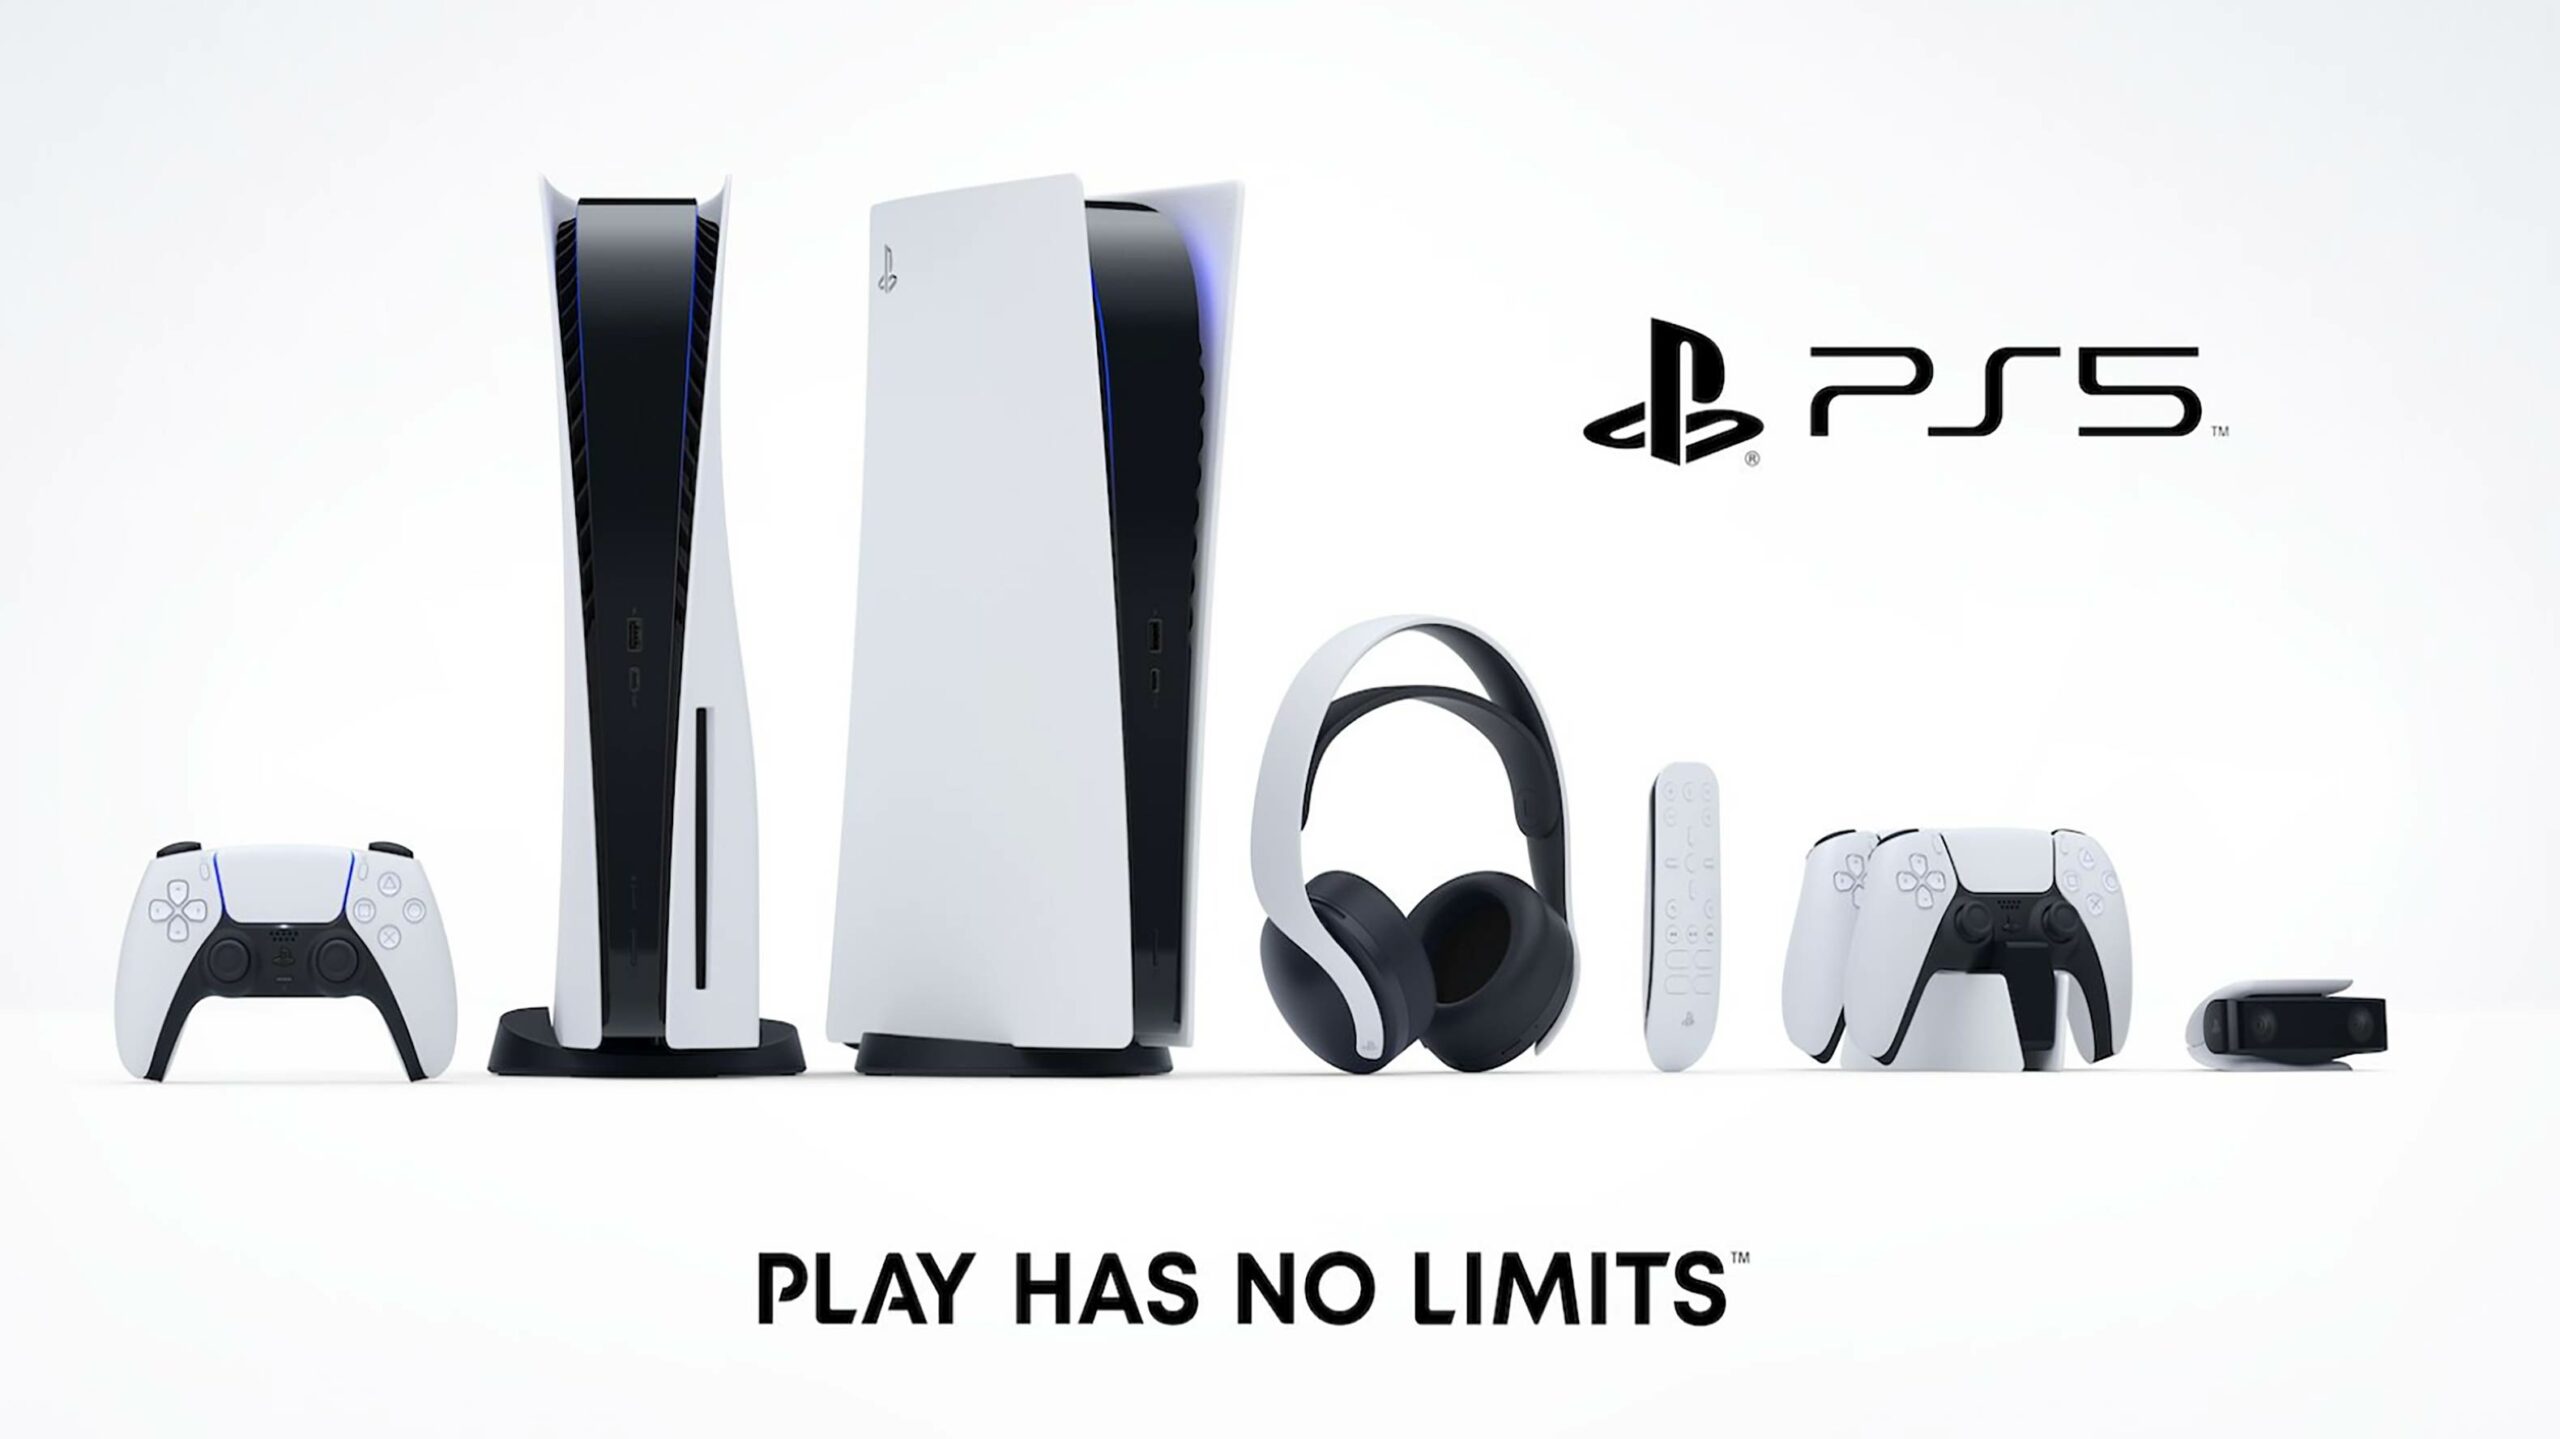 PS5 console and accessories